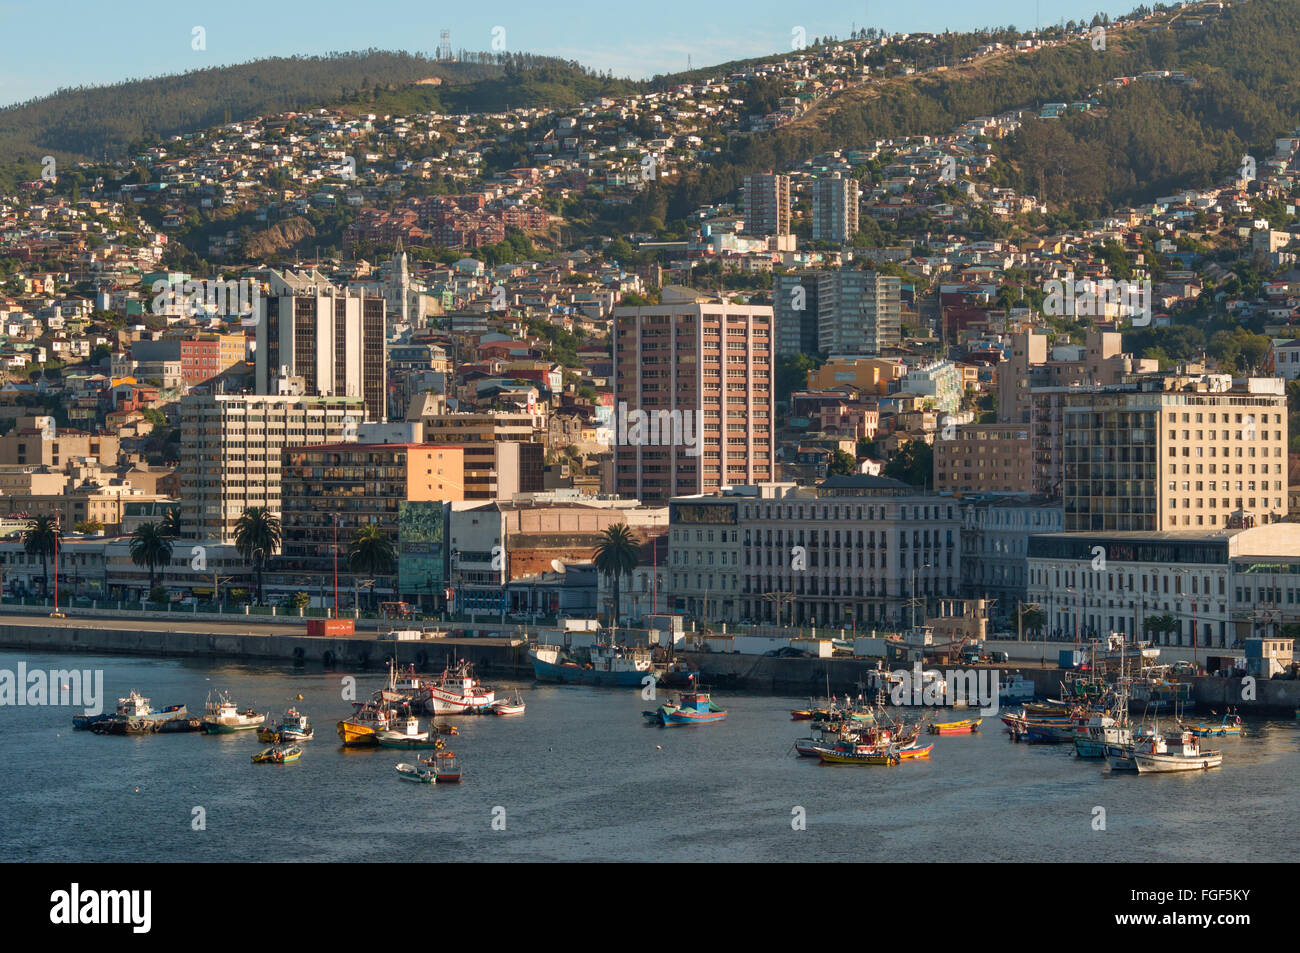 City scape of the UNESCO World Heritage city of Valparaiso as seen from the harbor, Chile. Stock Photo